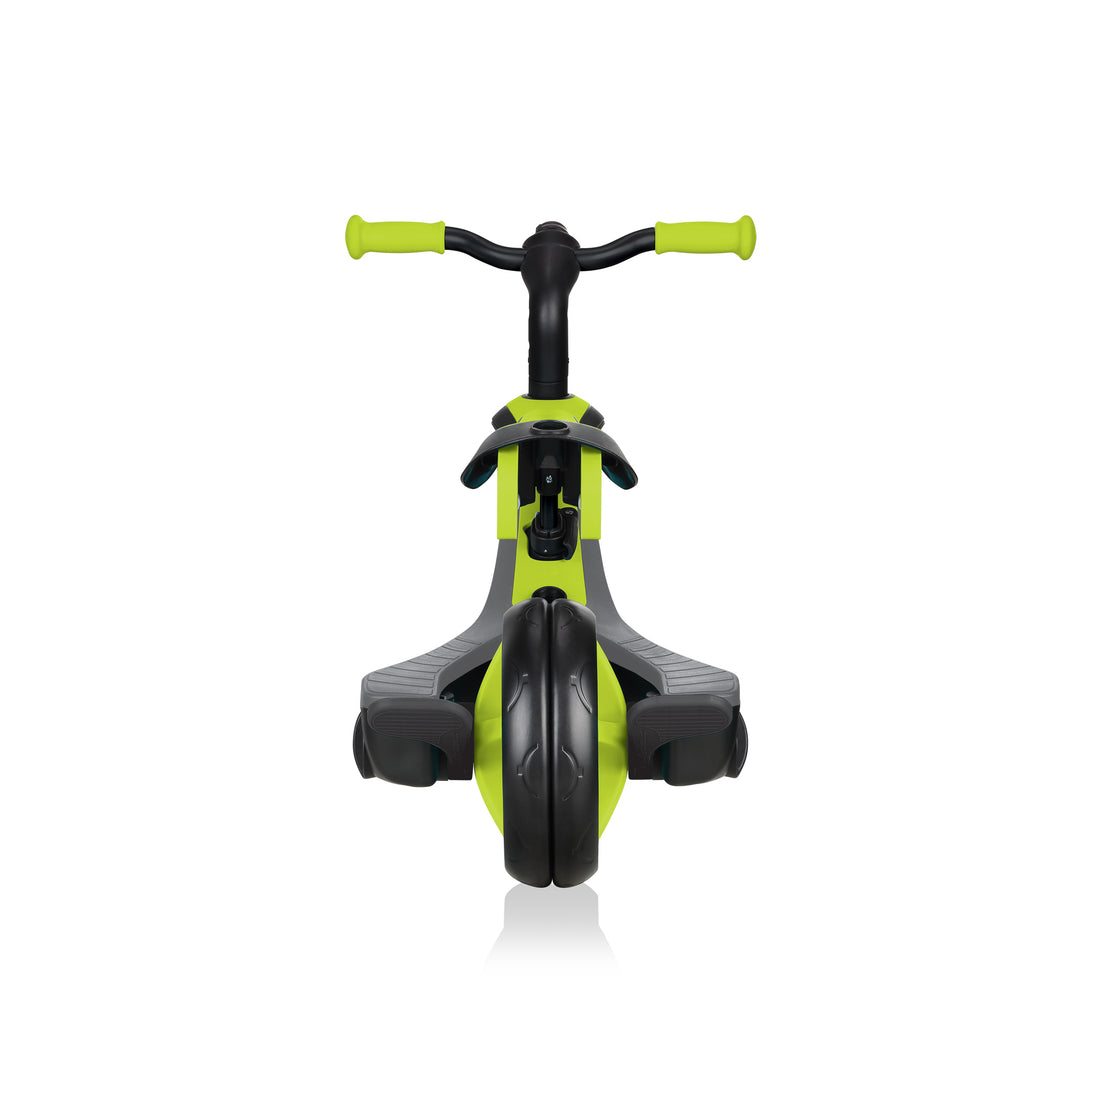 Globber Explorer Trike 4 In 1 - Lime Green (With Headrest) (10m - 5y)